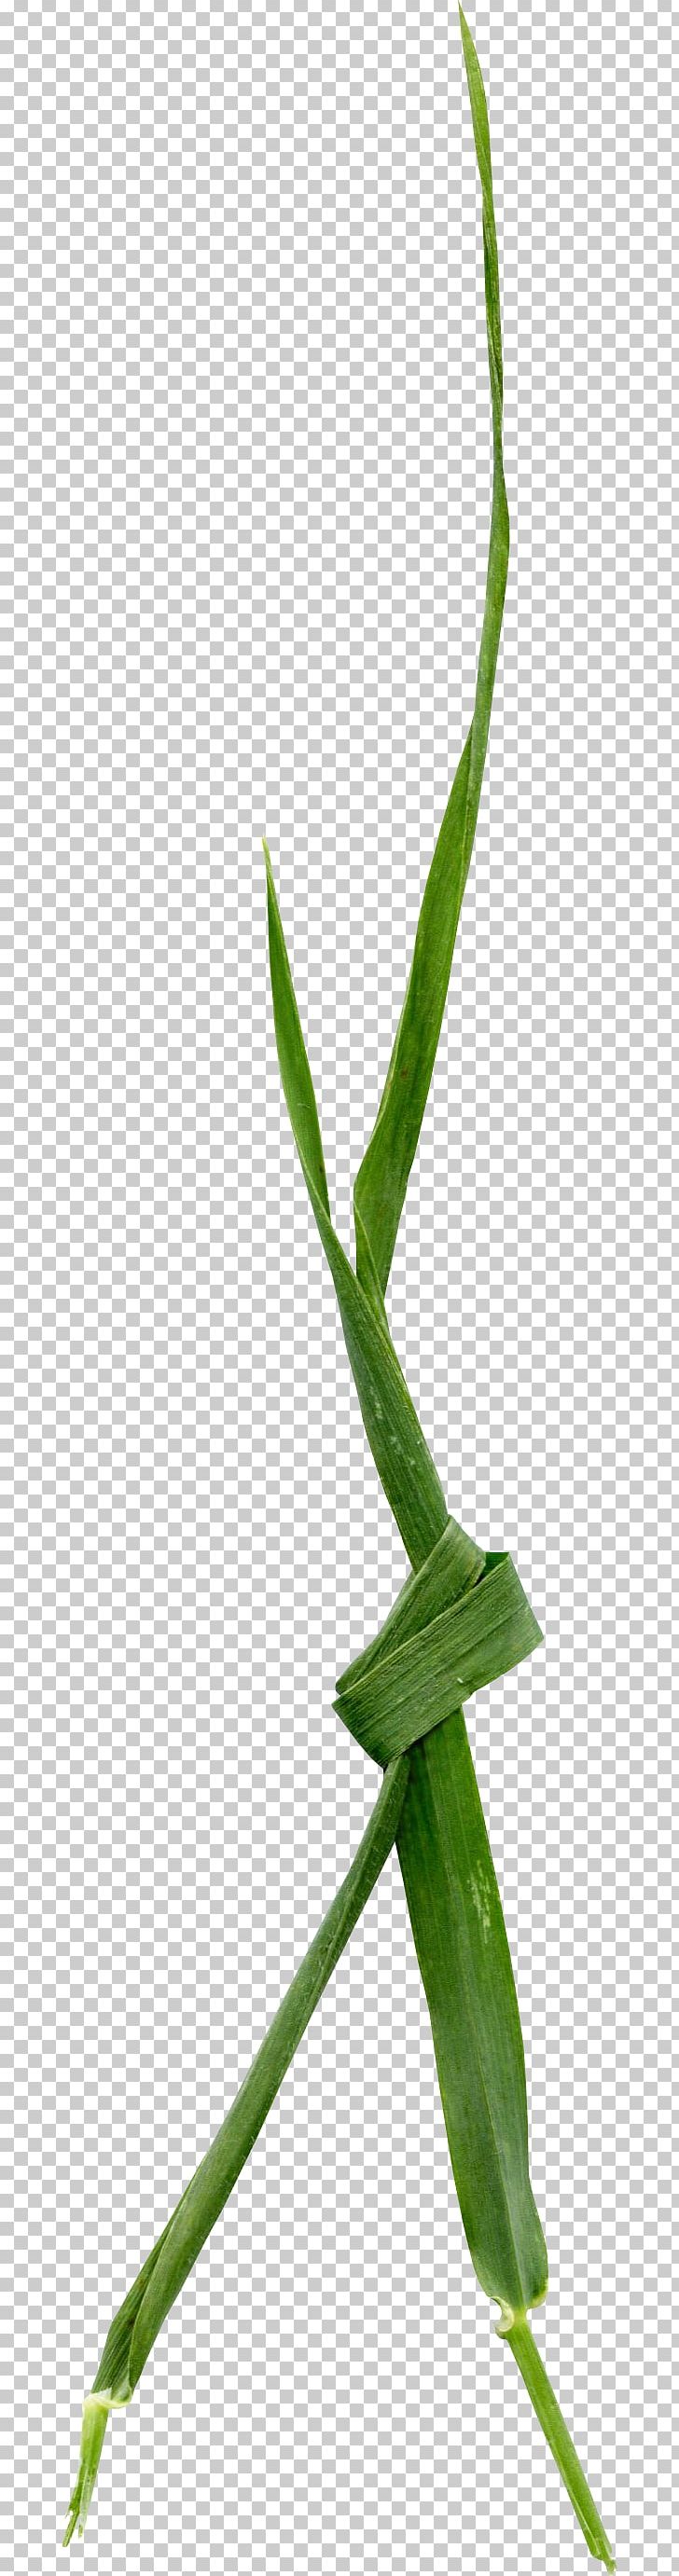 Leaf Grasses Plant Stem Close-up Aloe Vera PNG, Clipart, Aloe, Aloe Vera, Background Green, Closeup, Clothing Free PNG Download